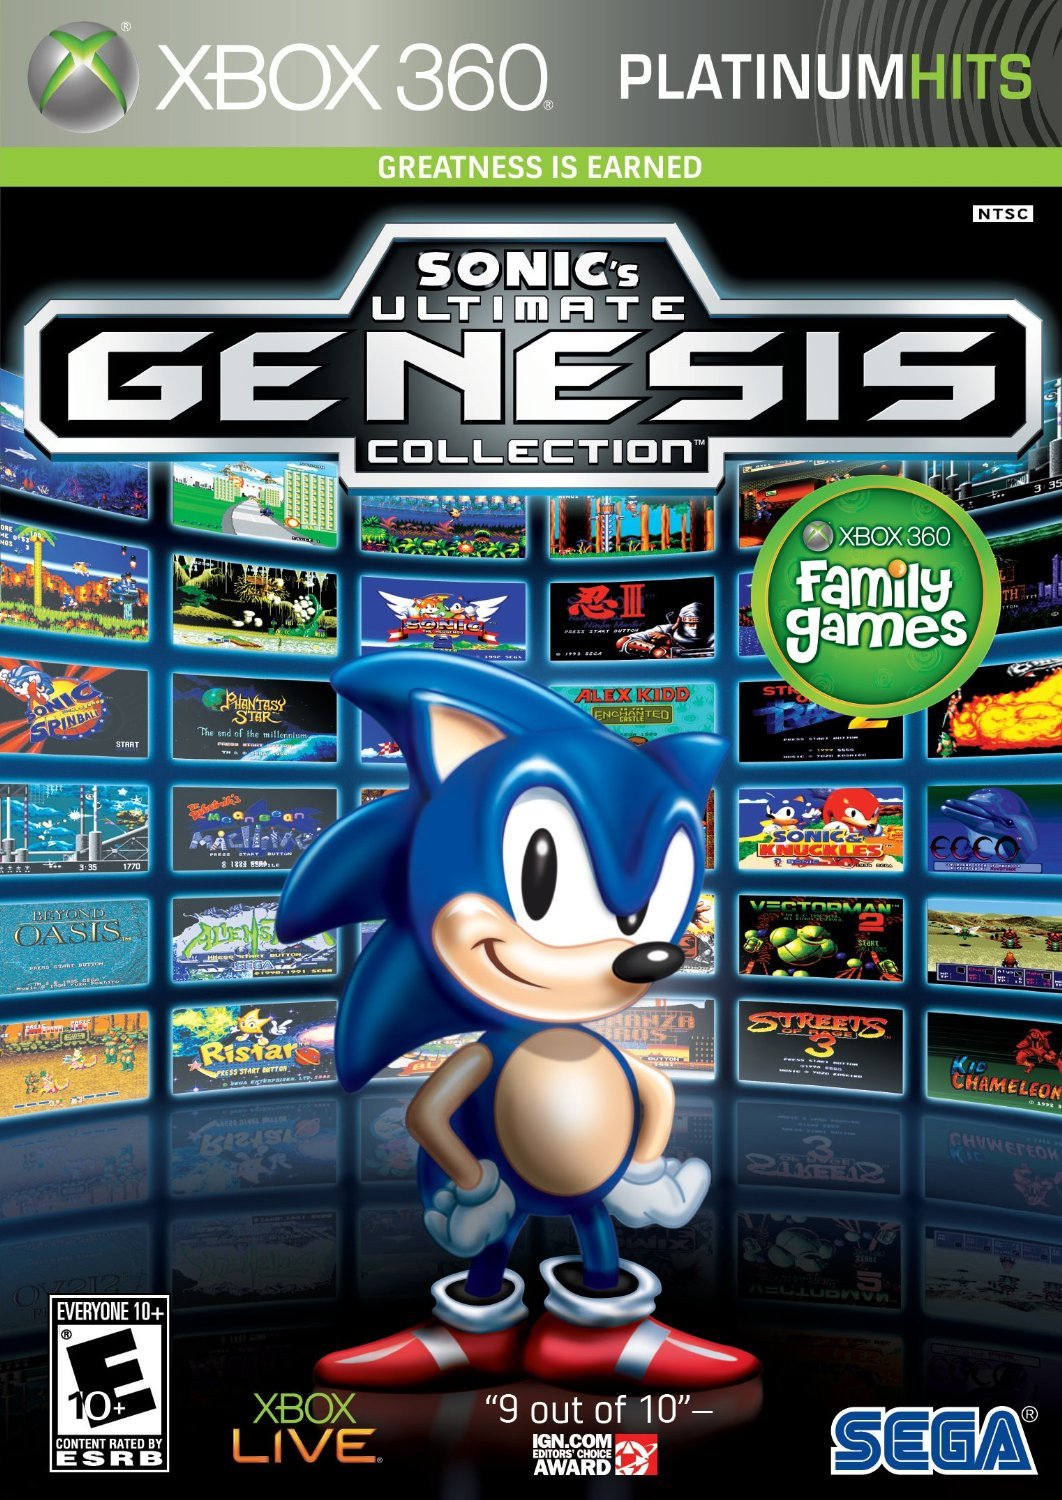 Sonic's Ultimate Genesis Collection - Darkside Records